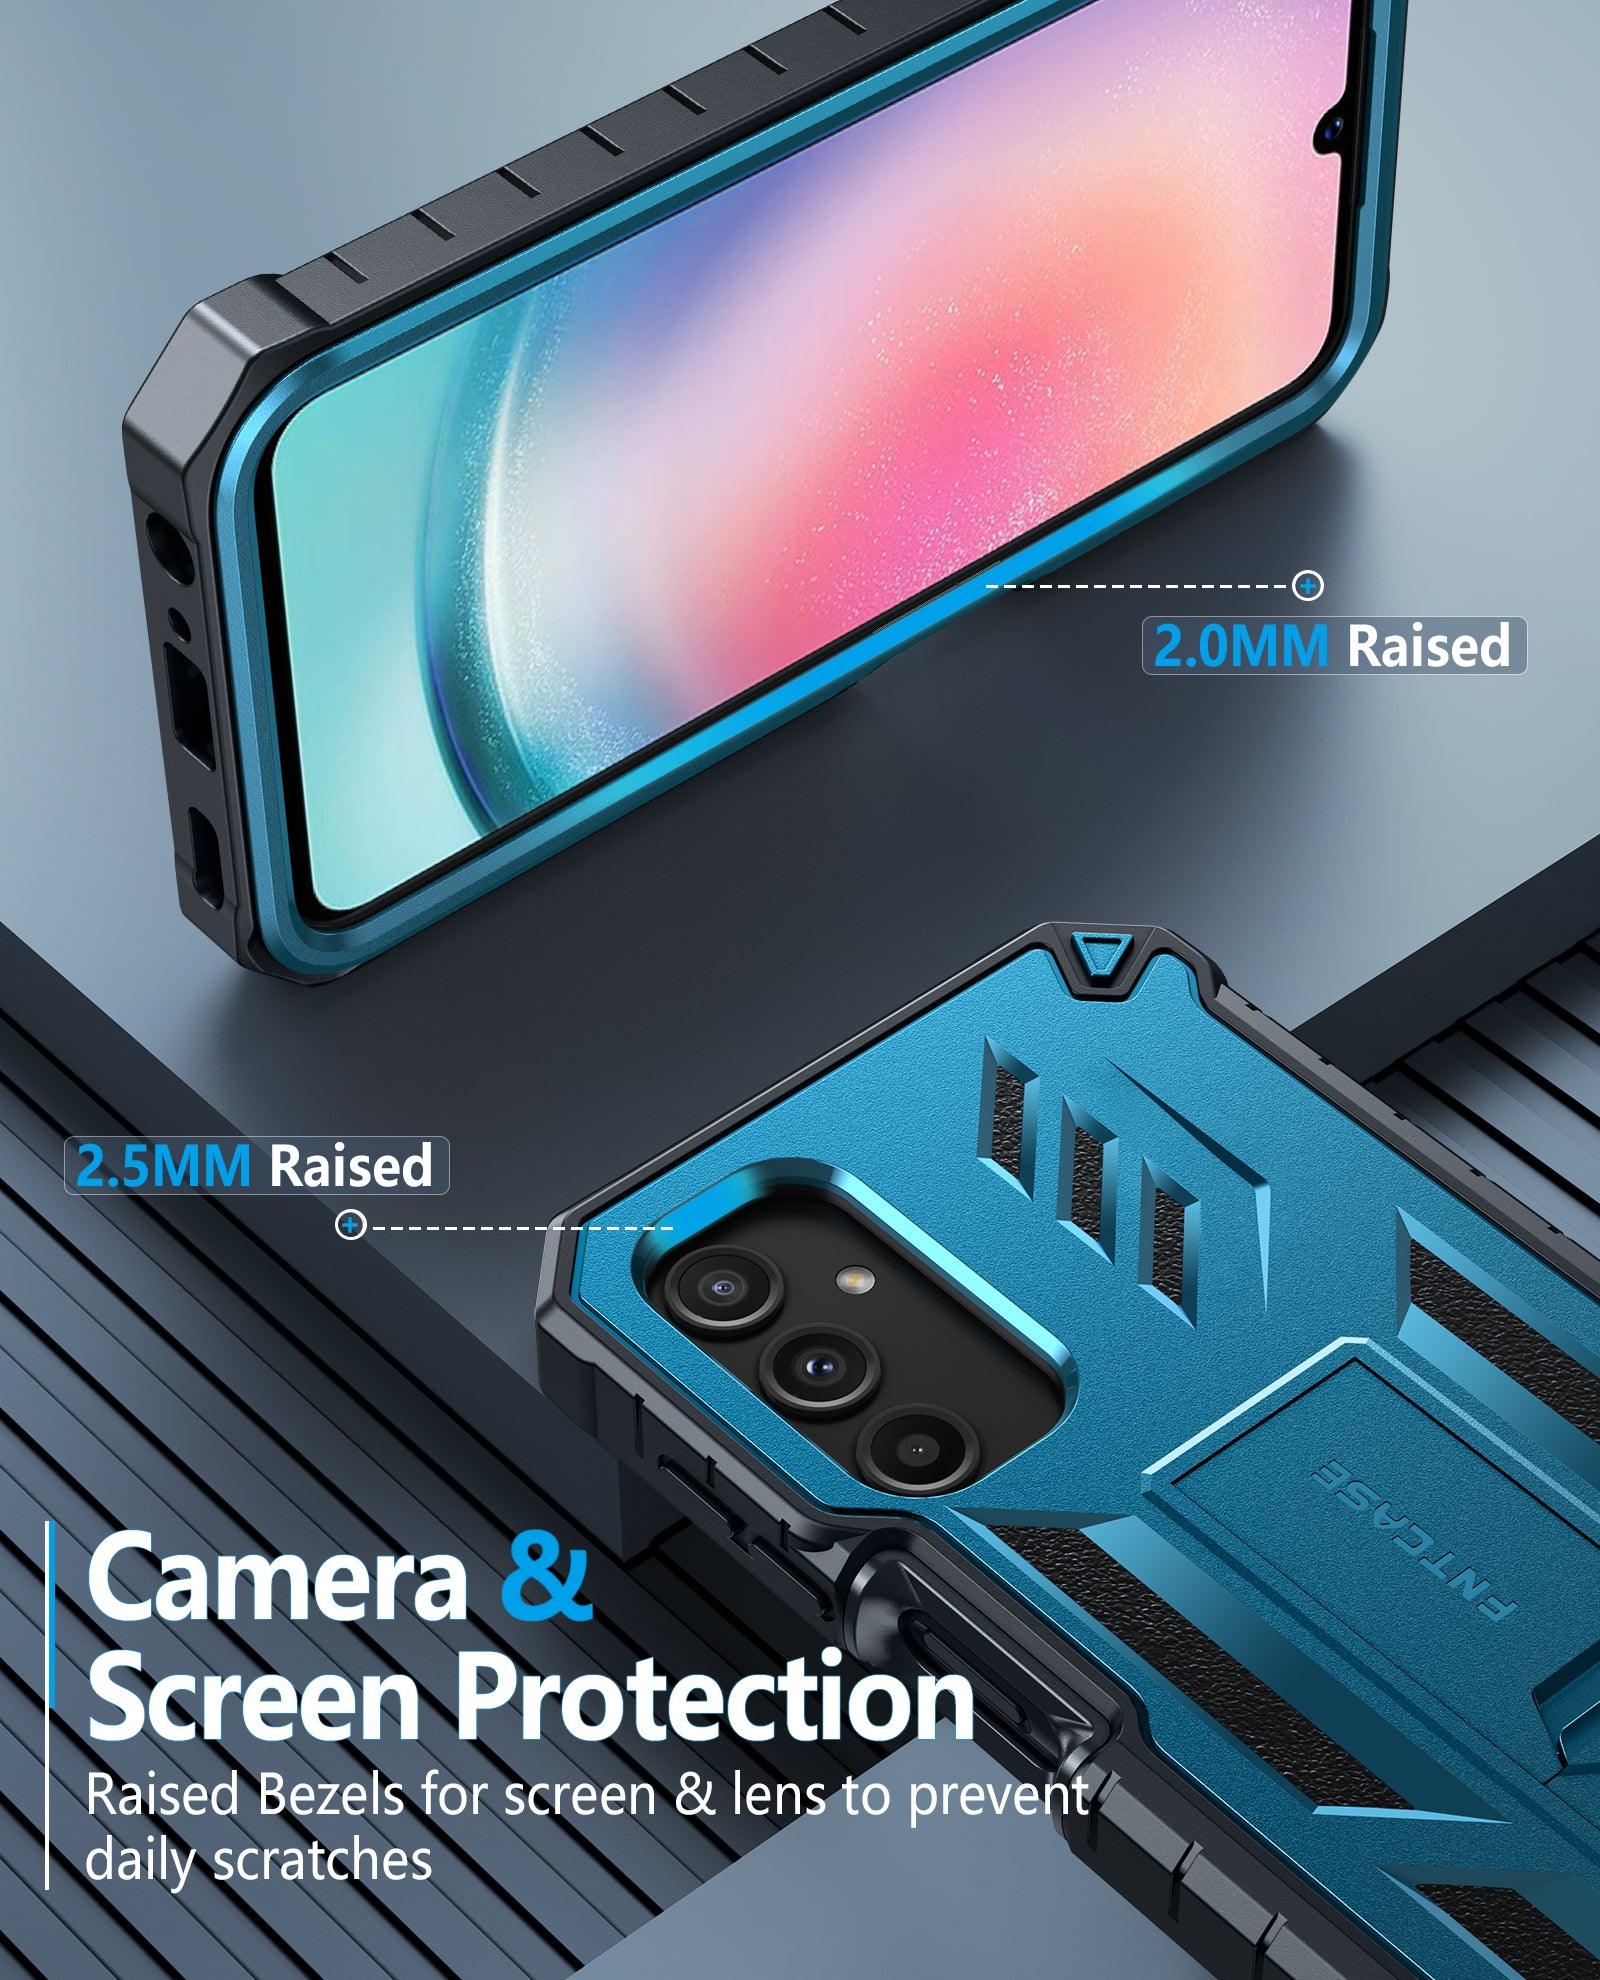 Galaxy A25 /A24 5G Case: Protective Military Grade Drop Proof Phone Case with Built-in Screen Protector and Kickstand - FNTCASE OFFICIAL